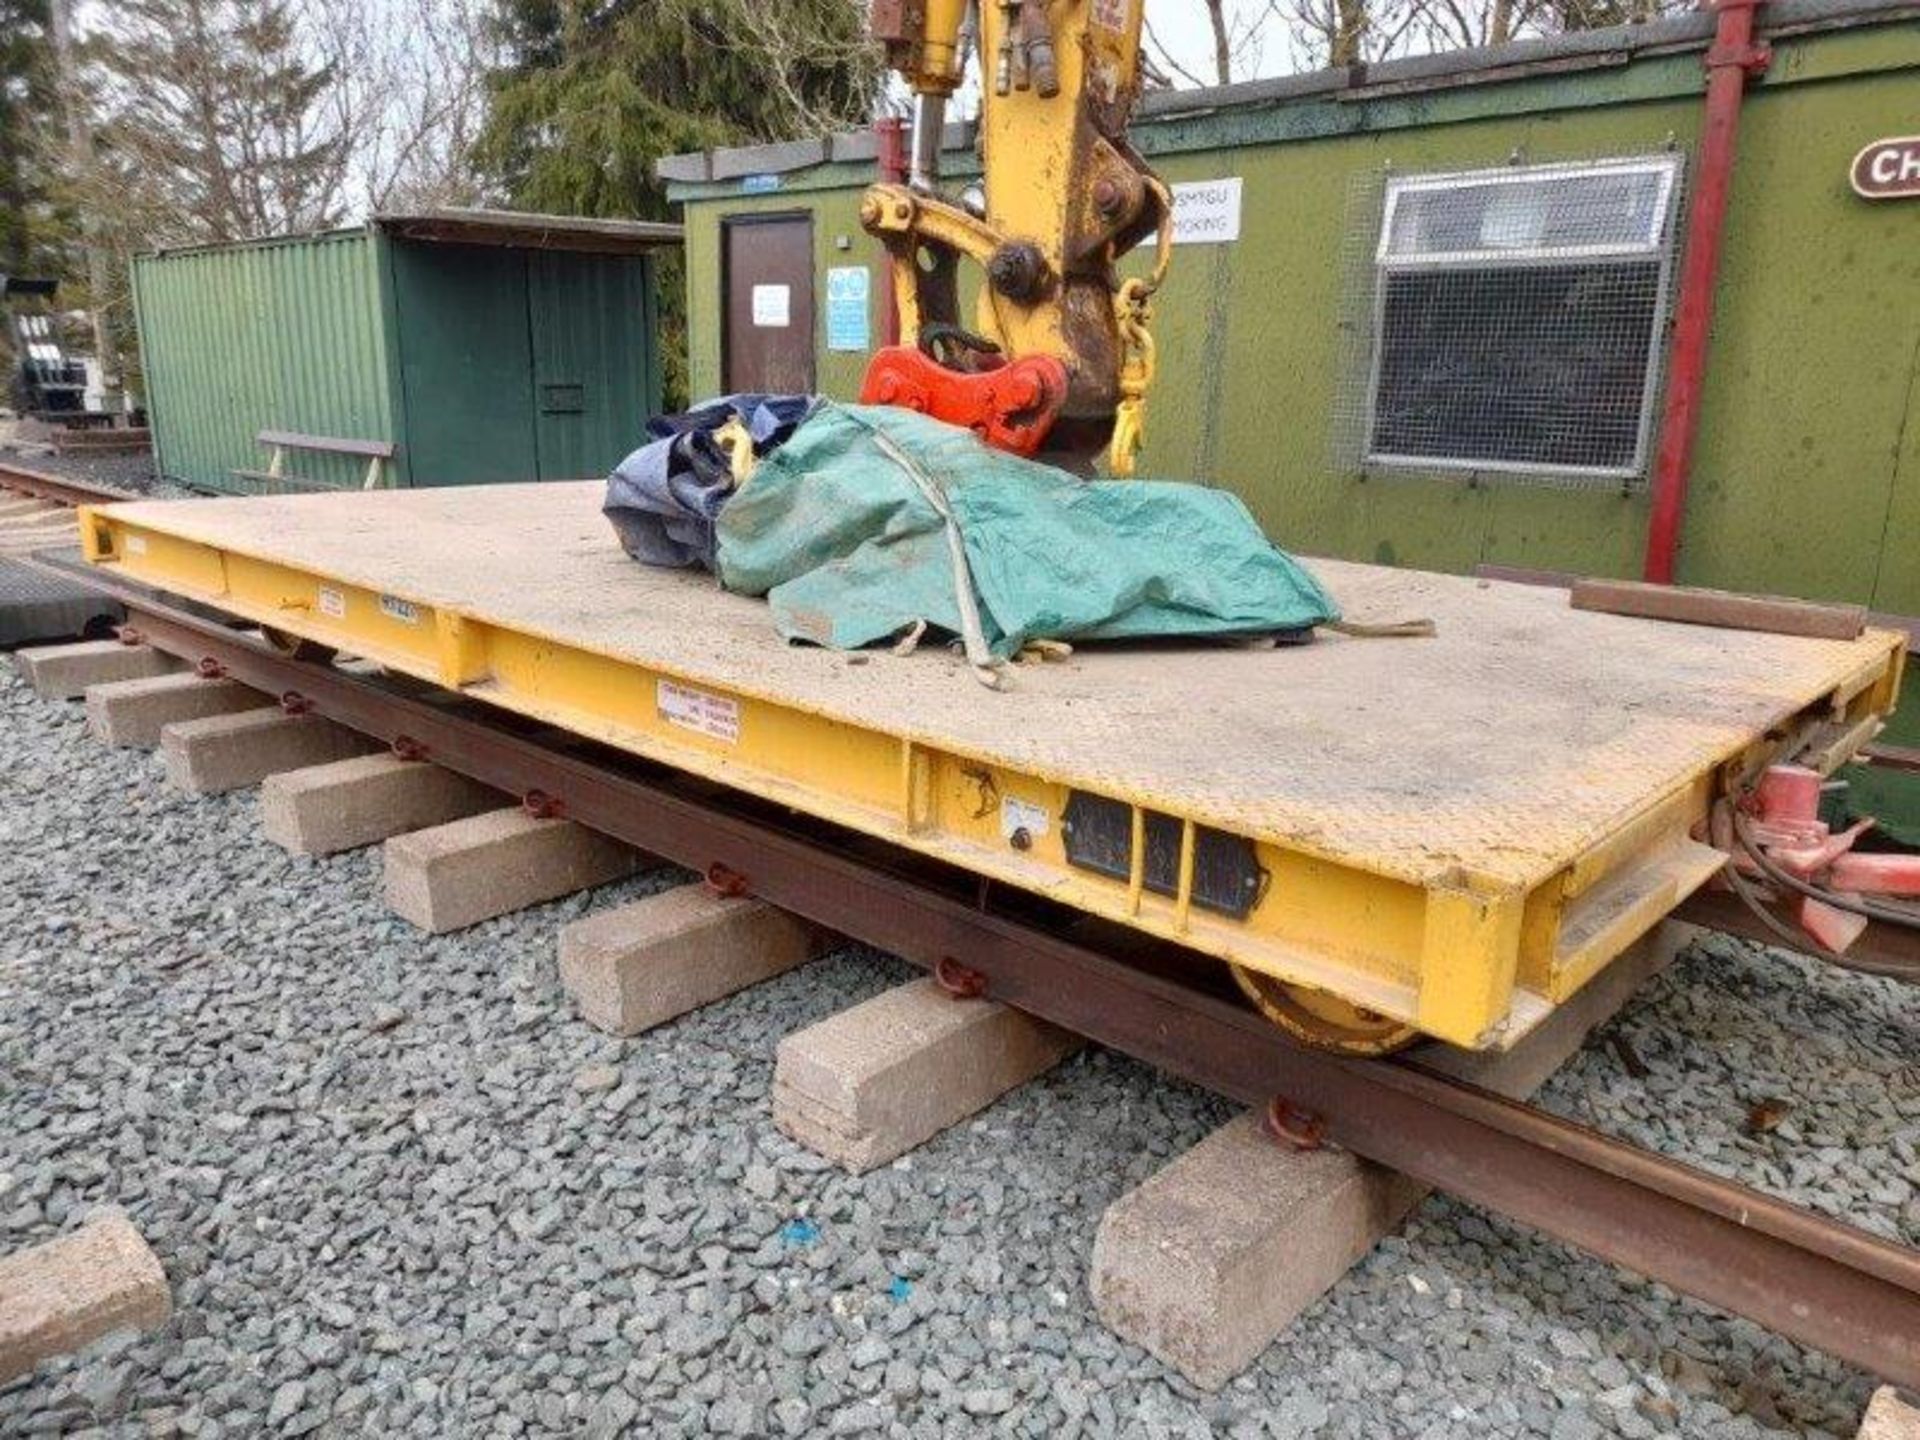 Rexquote 4M Type T4 rail trailer, 21,000Kg tare weight - Image 2 of 2